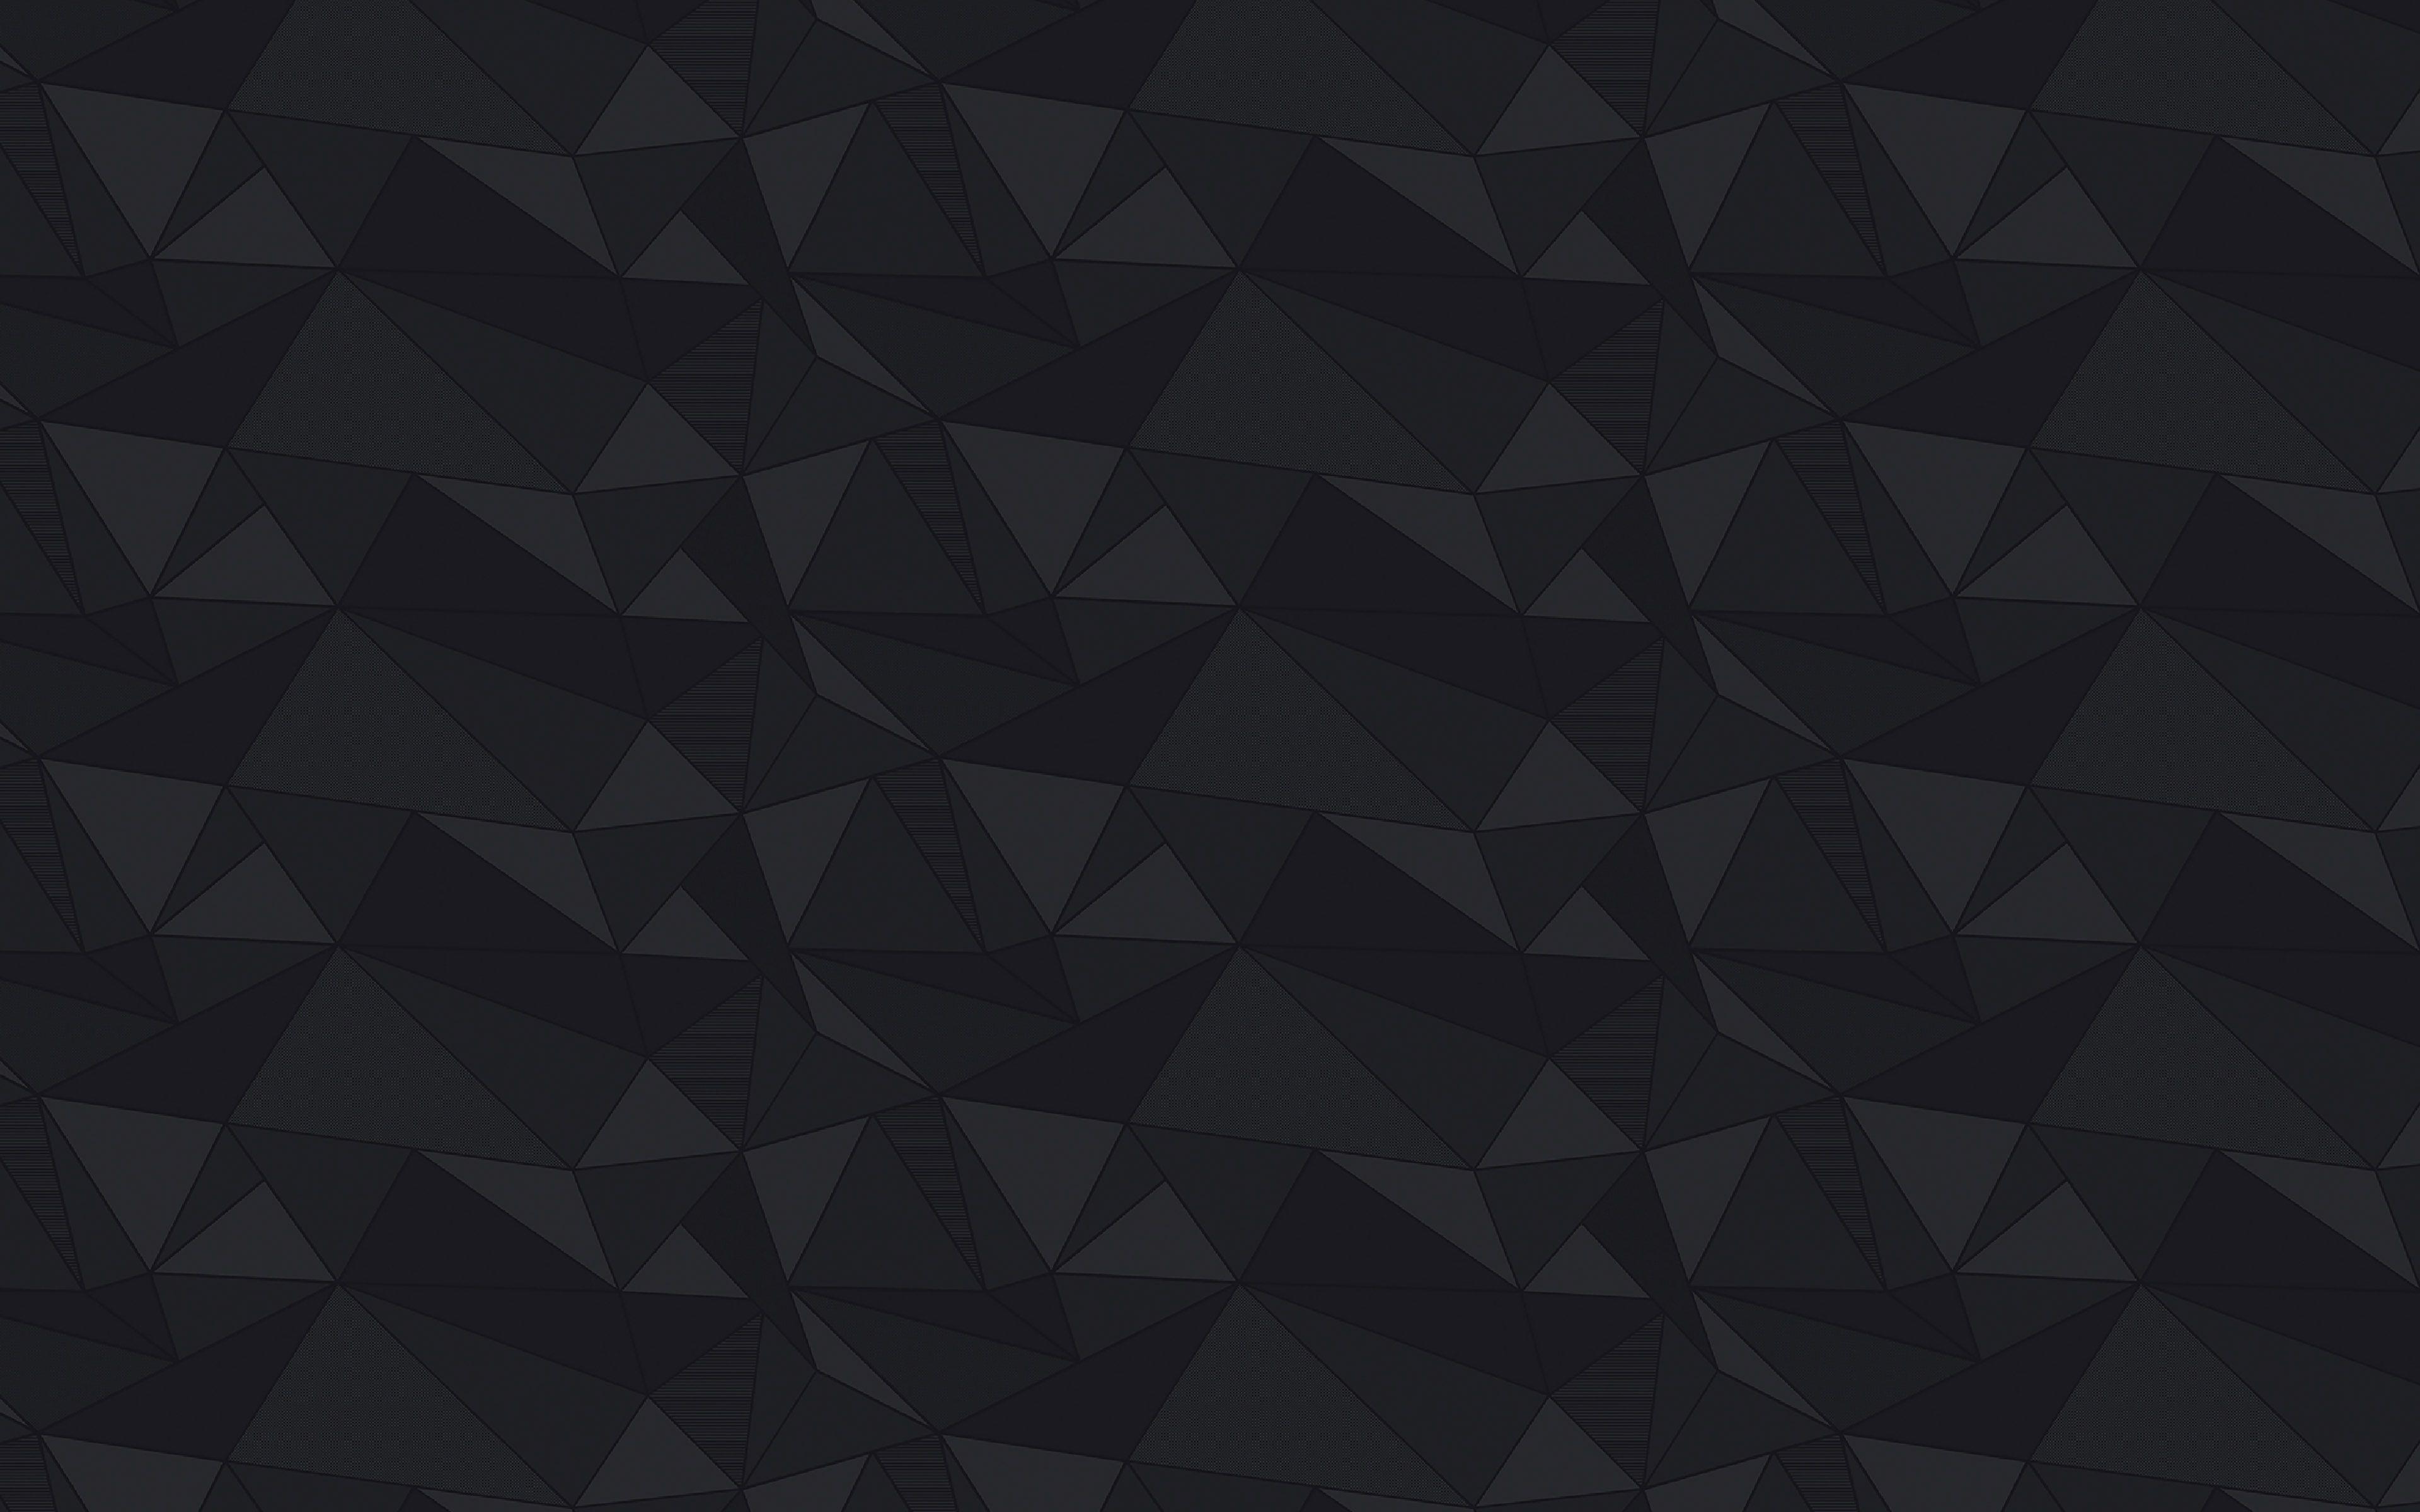 Dark Triangle Wallpapers - Top Free Dark Triangle Backgrounds ...